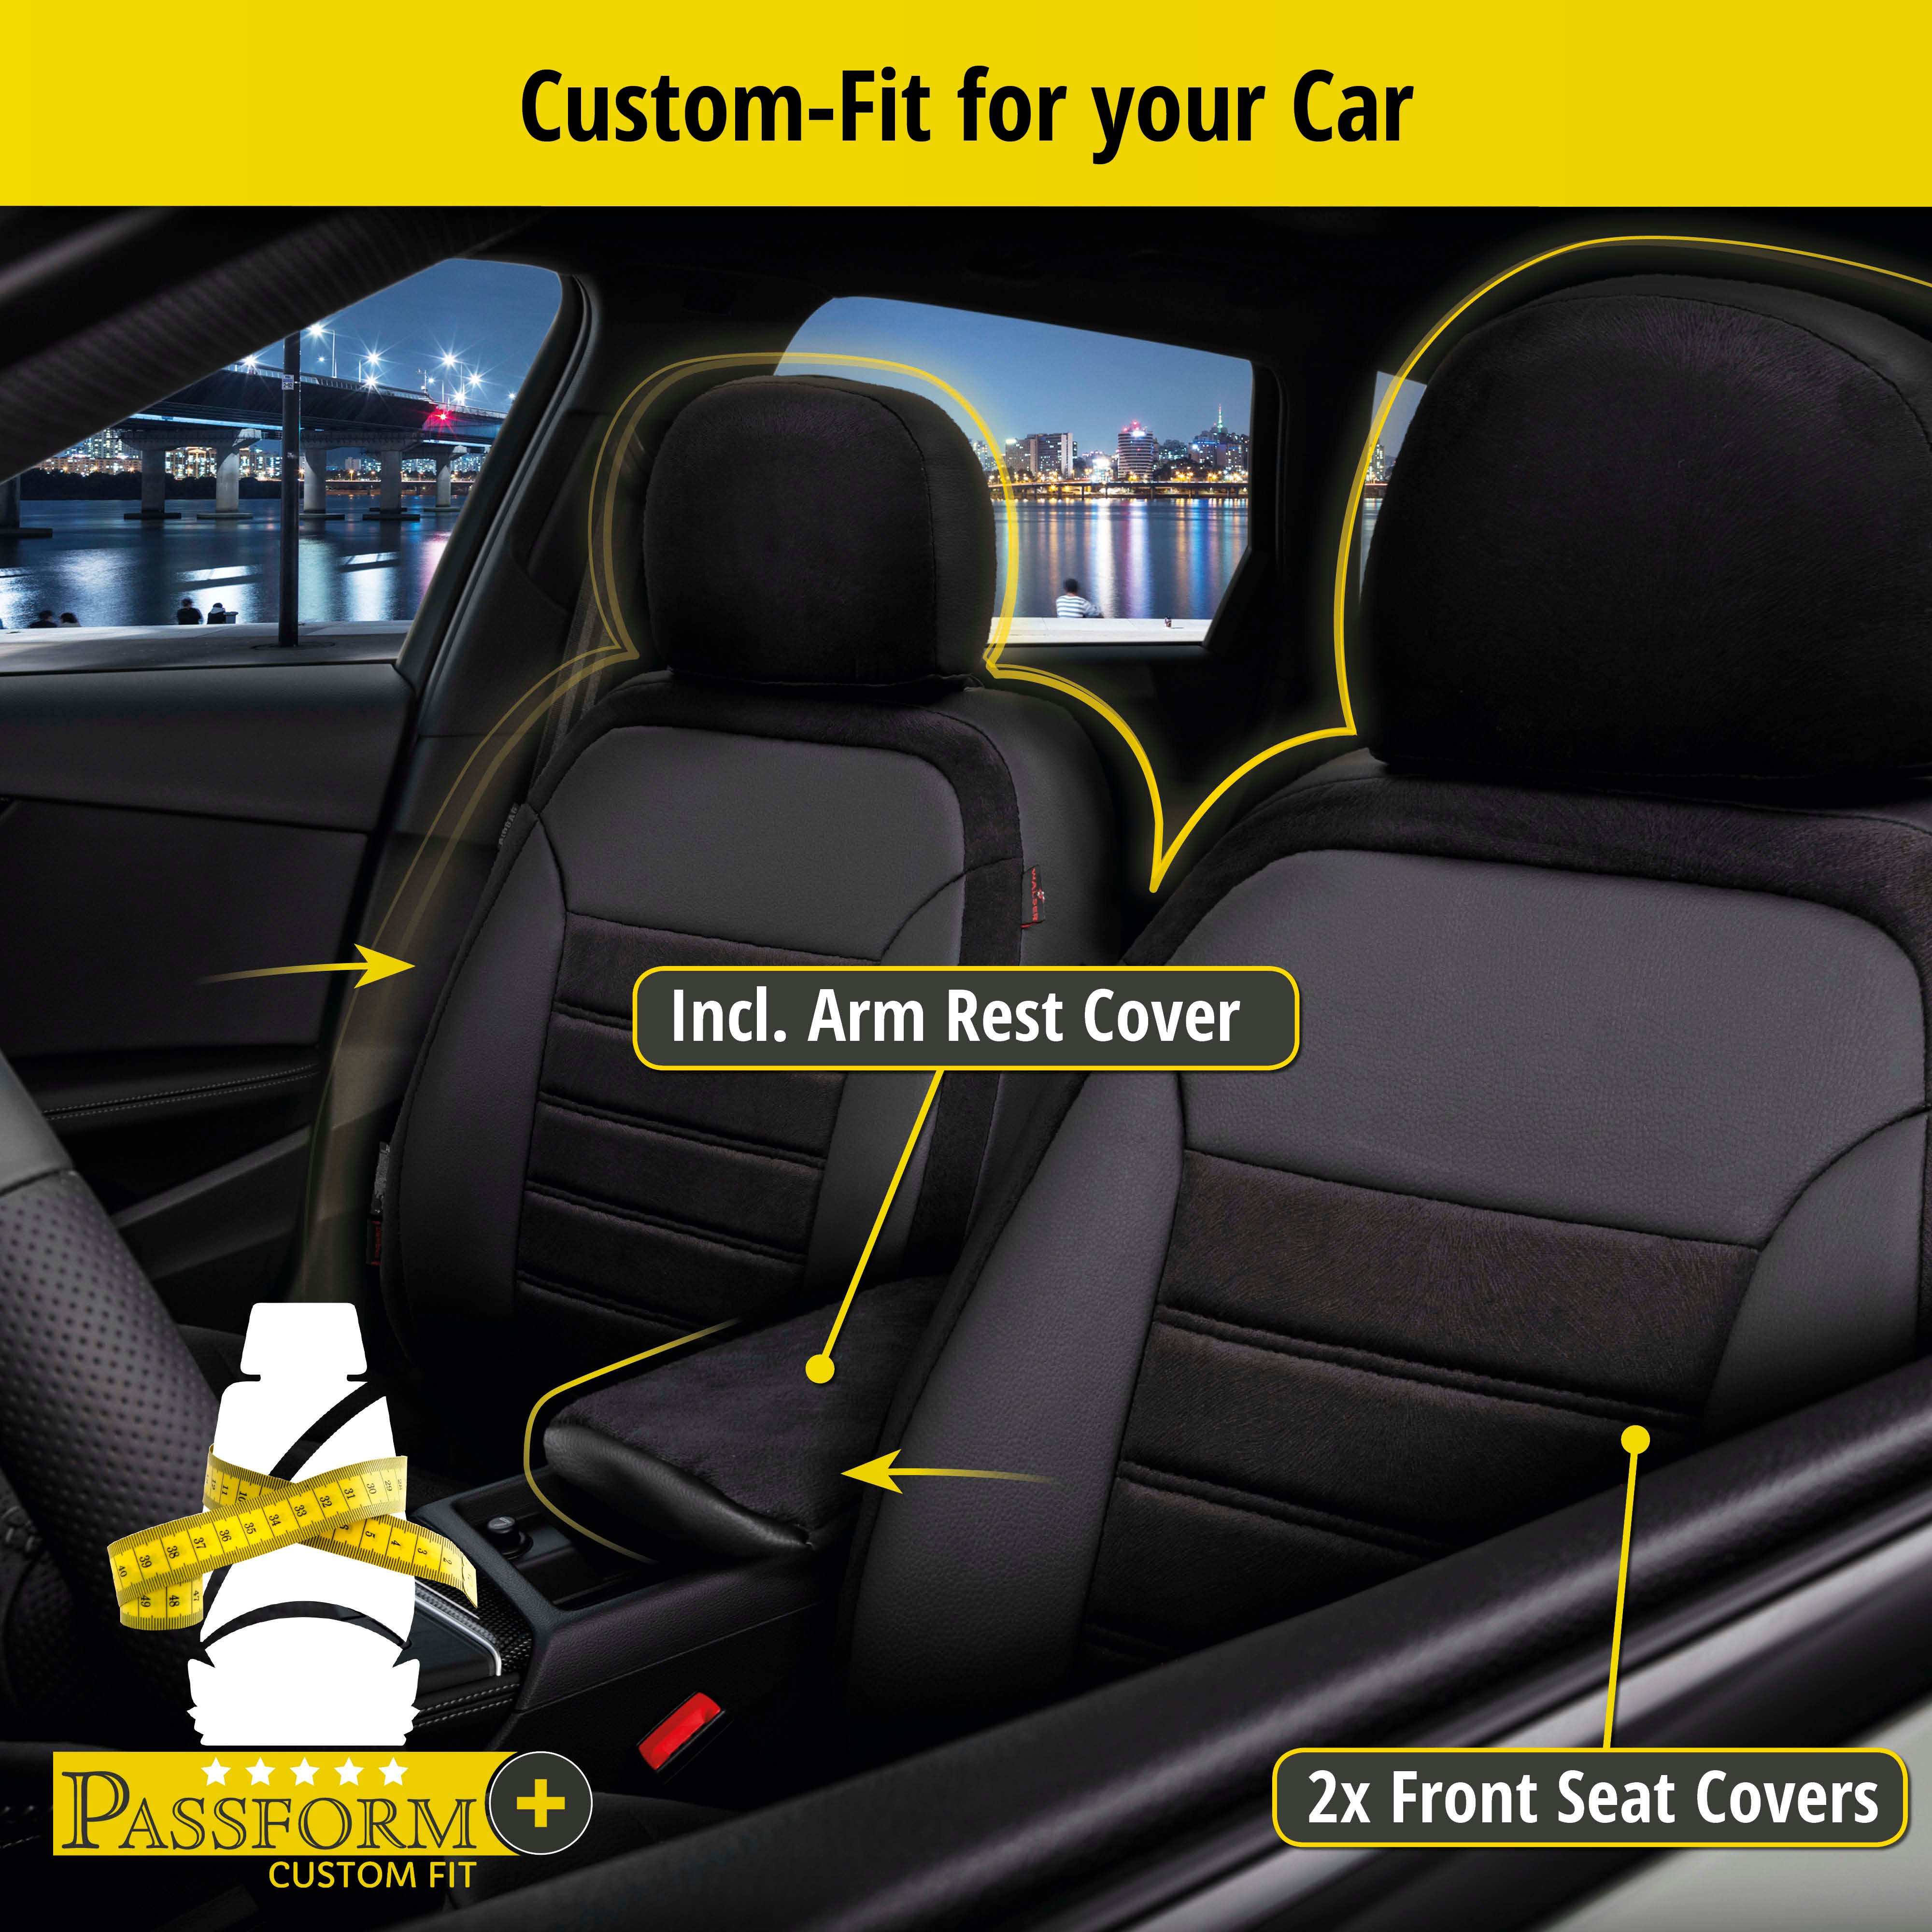 Seat Cover Bari for Audi A4 Avant (8W5, 8WD, B9) 06/2008-Today, 2 seat covers for normal seats